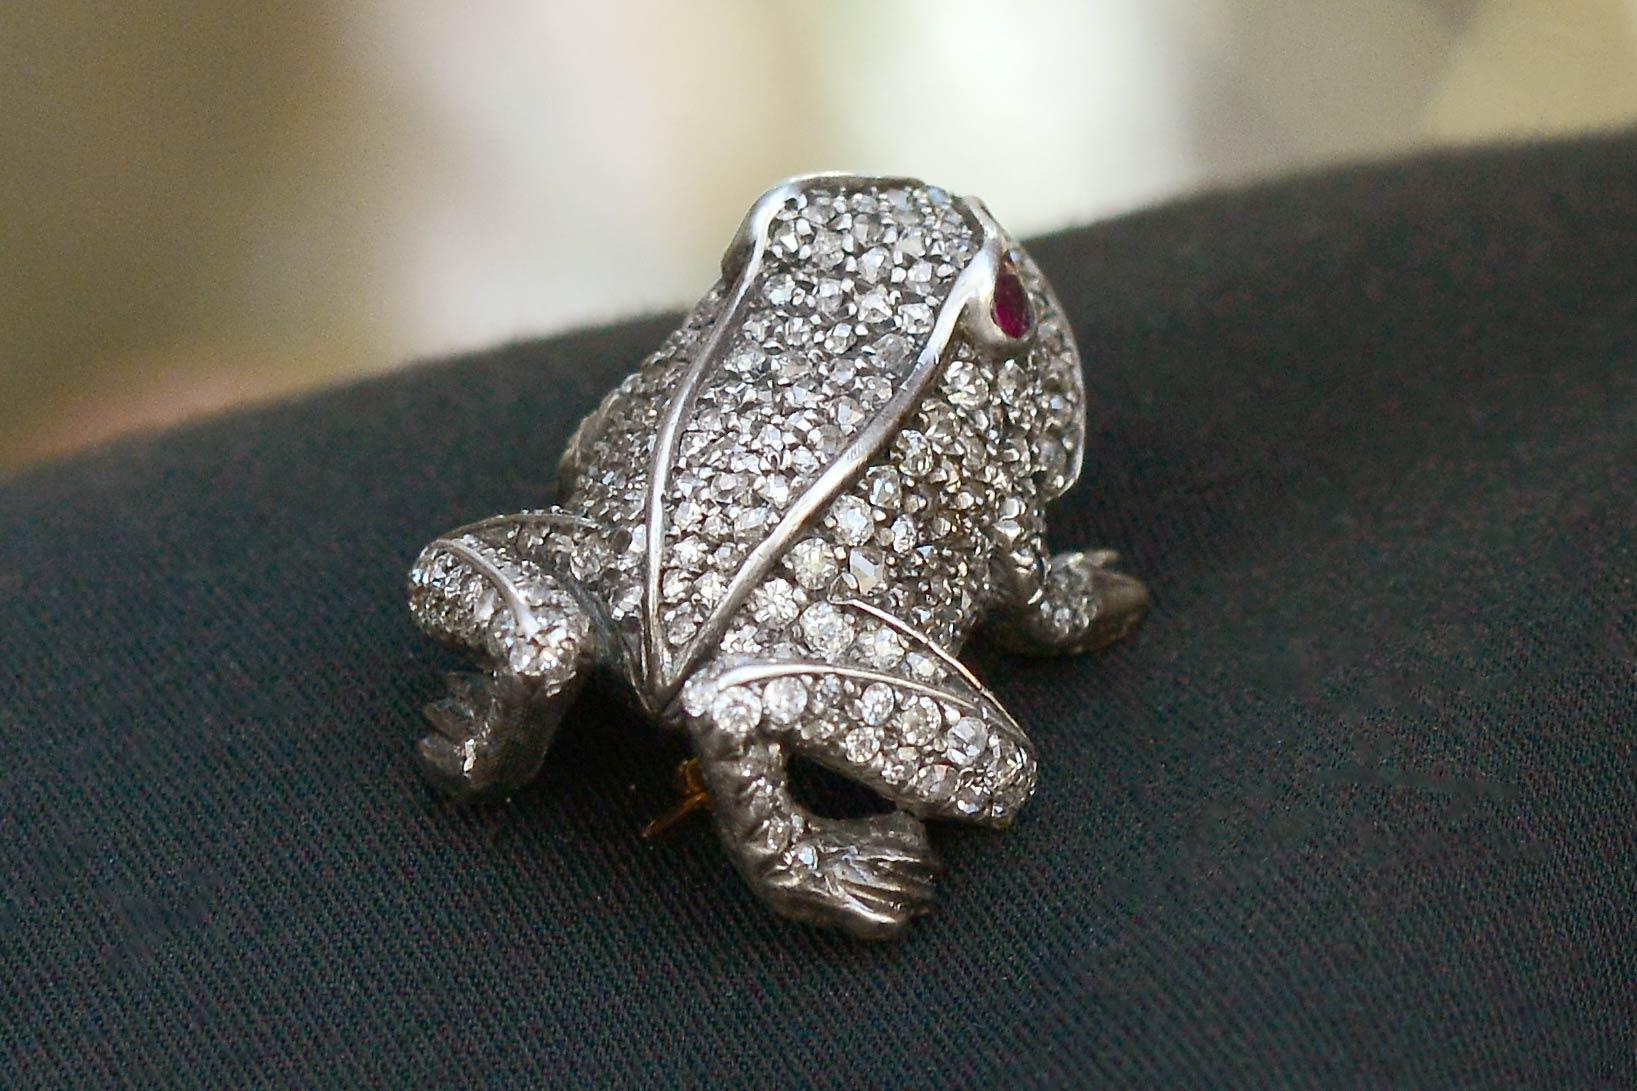 Art Nouveau Antique Diamond Frog Pin Brooch Ruby Eyes Toad 2 Carats Old Mine European Rose